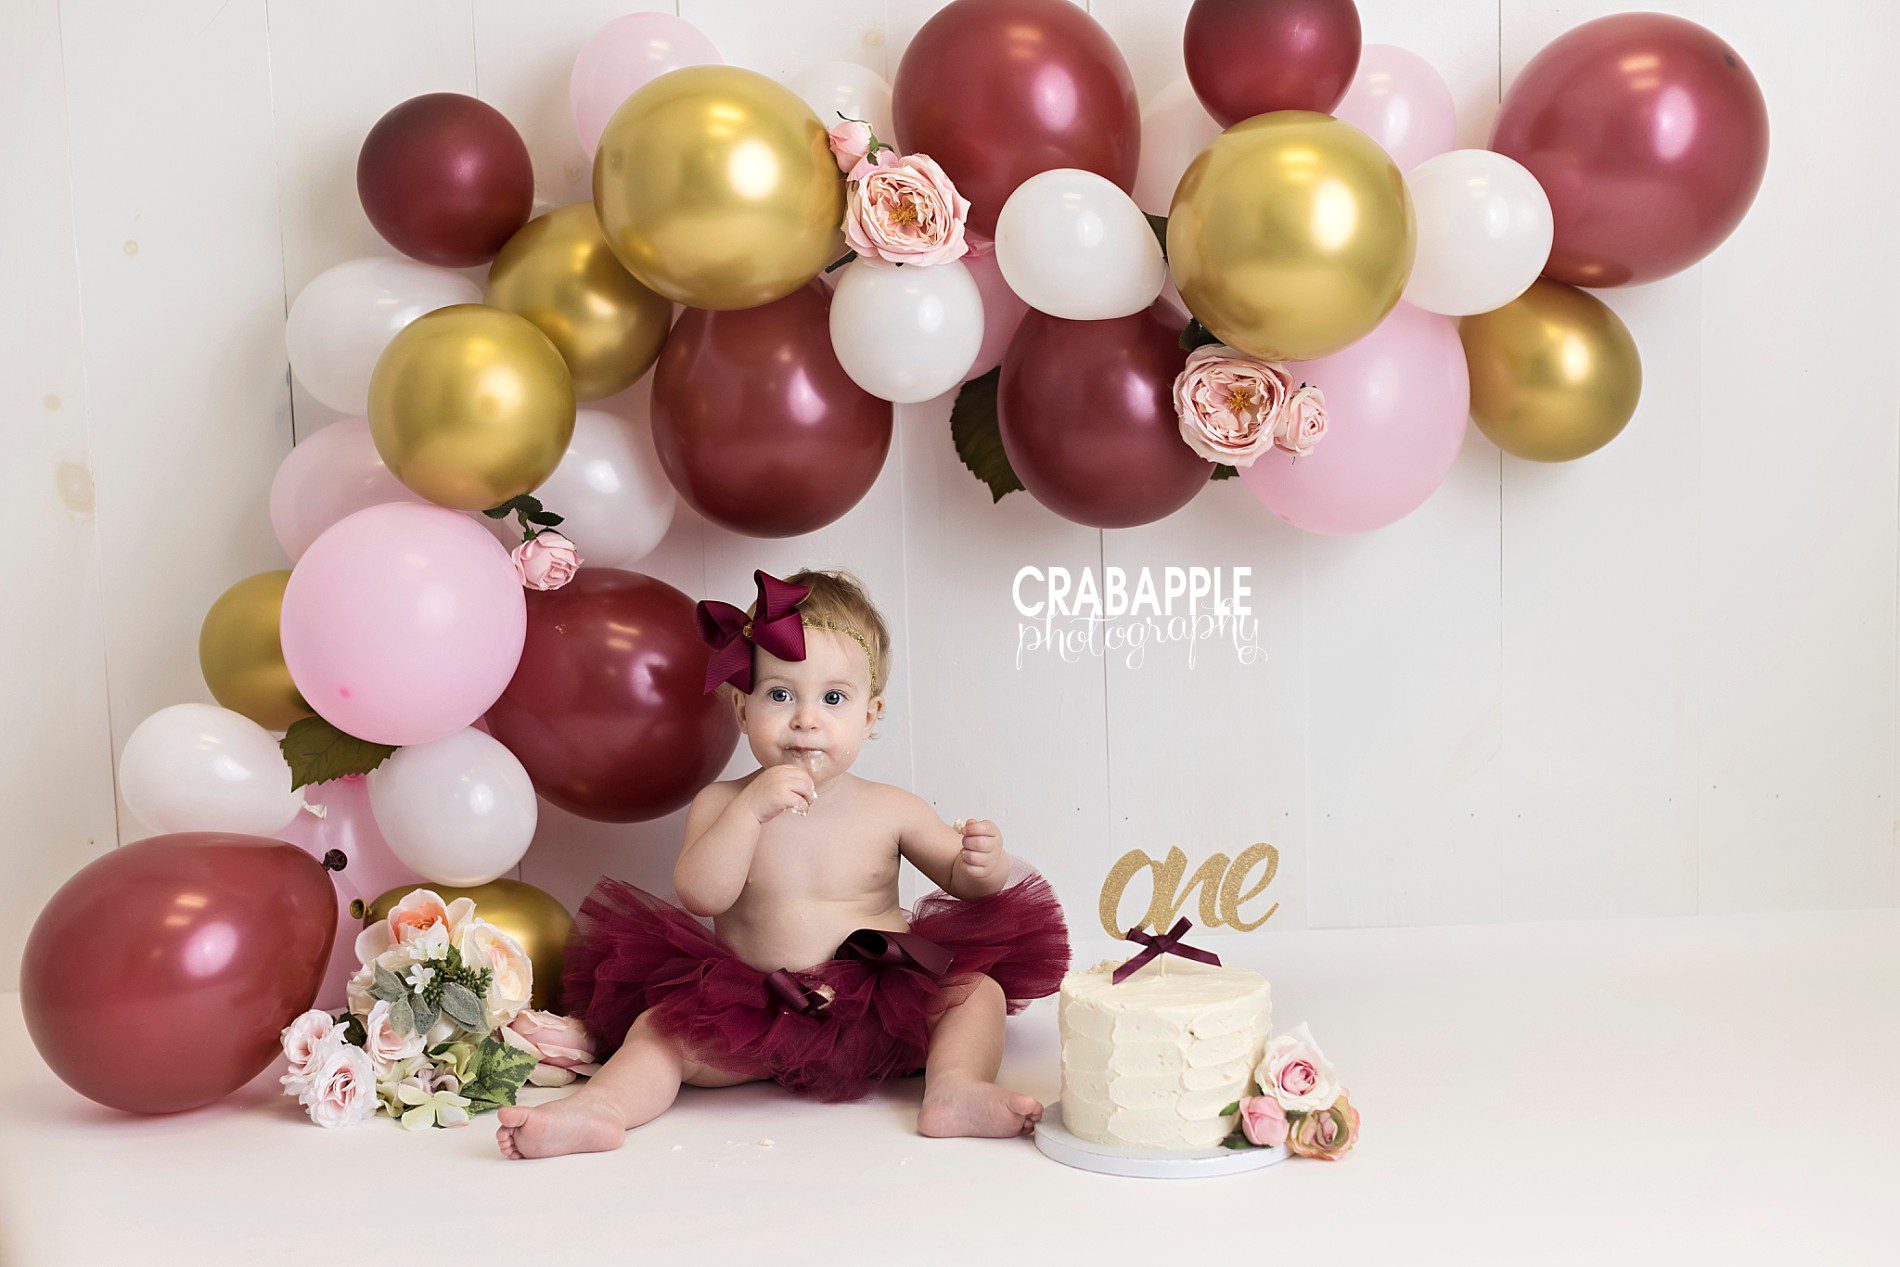 Balloon arch ideas for cake smash photos. An arch with burgundy deep red, gold, blush pink and white balloons and pink flowers.